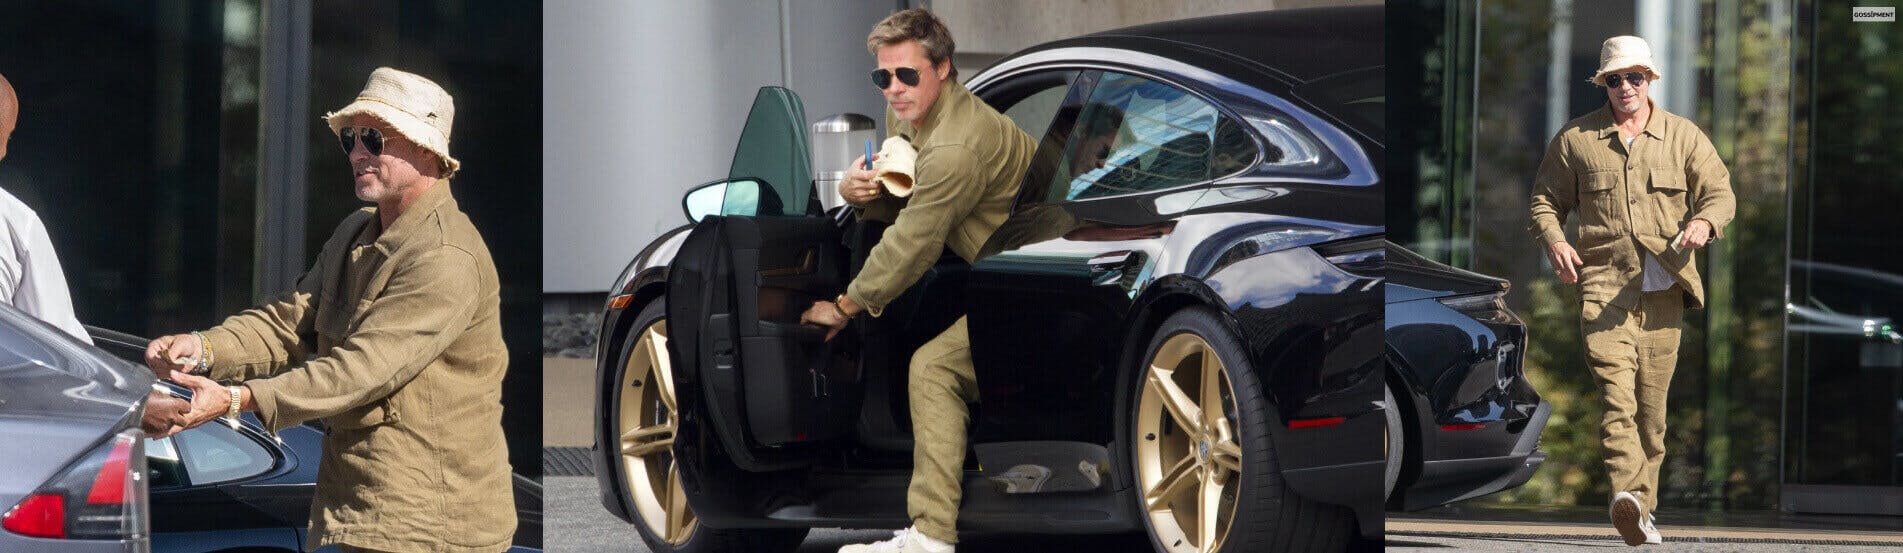 Cover Image for Brad Pitt Seen In Public For The First Time After Pax Jolie-pitt’s Explosive Rant On Father’s Day 2020 Re-emerges